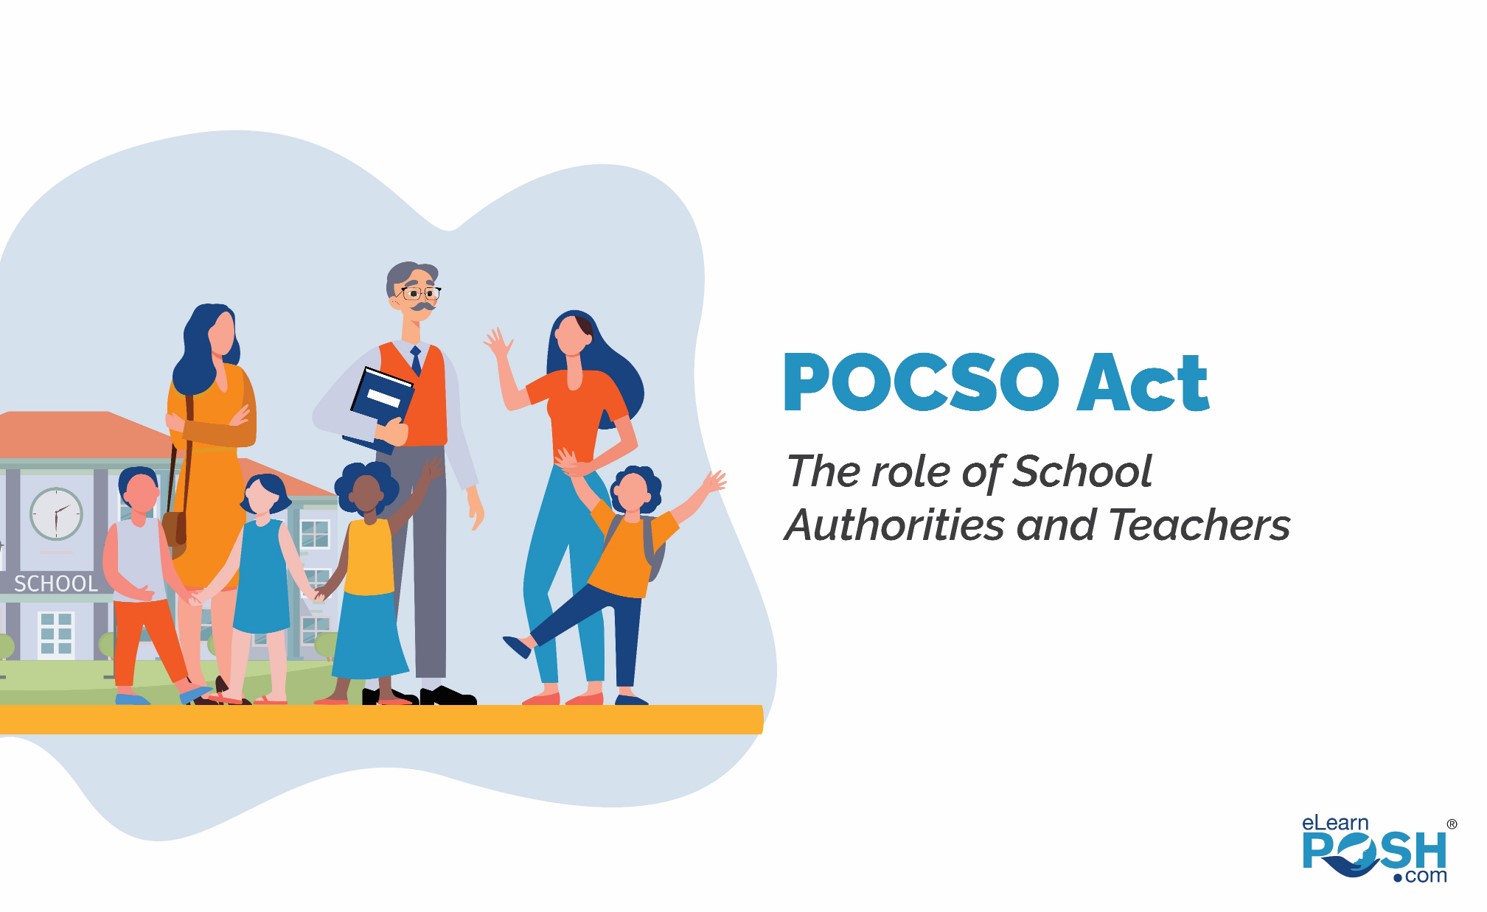 POCSO Act, 2012: The role of School Authorities and Teachers